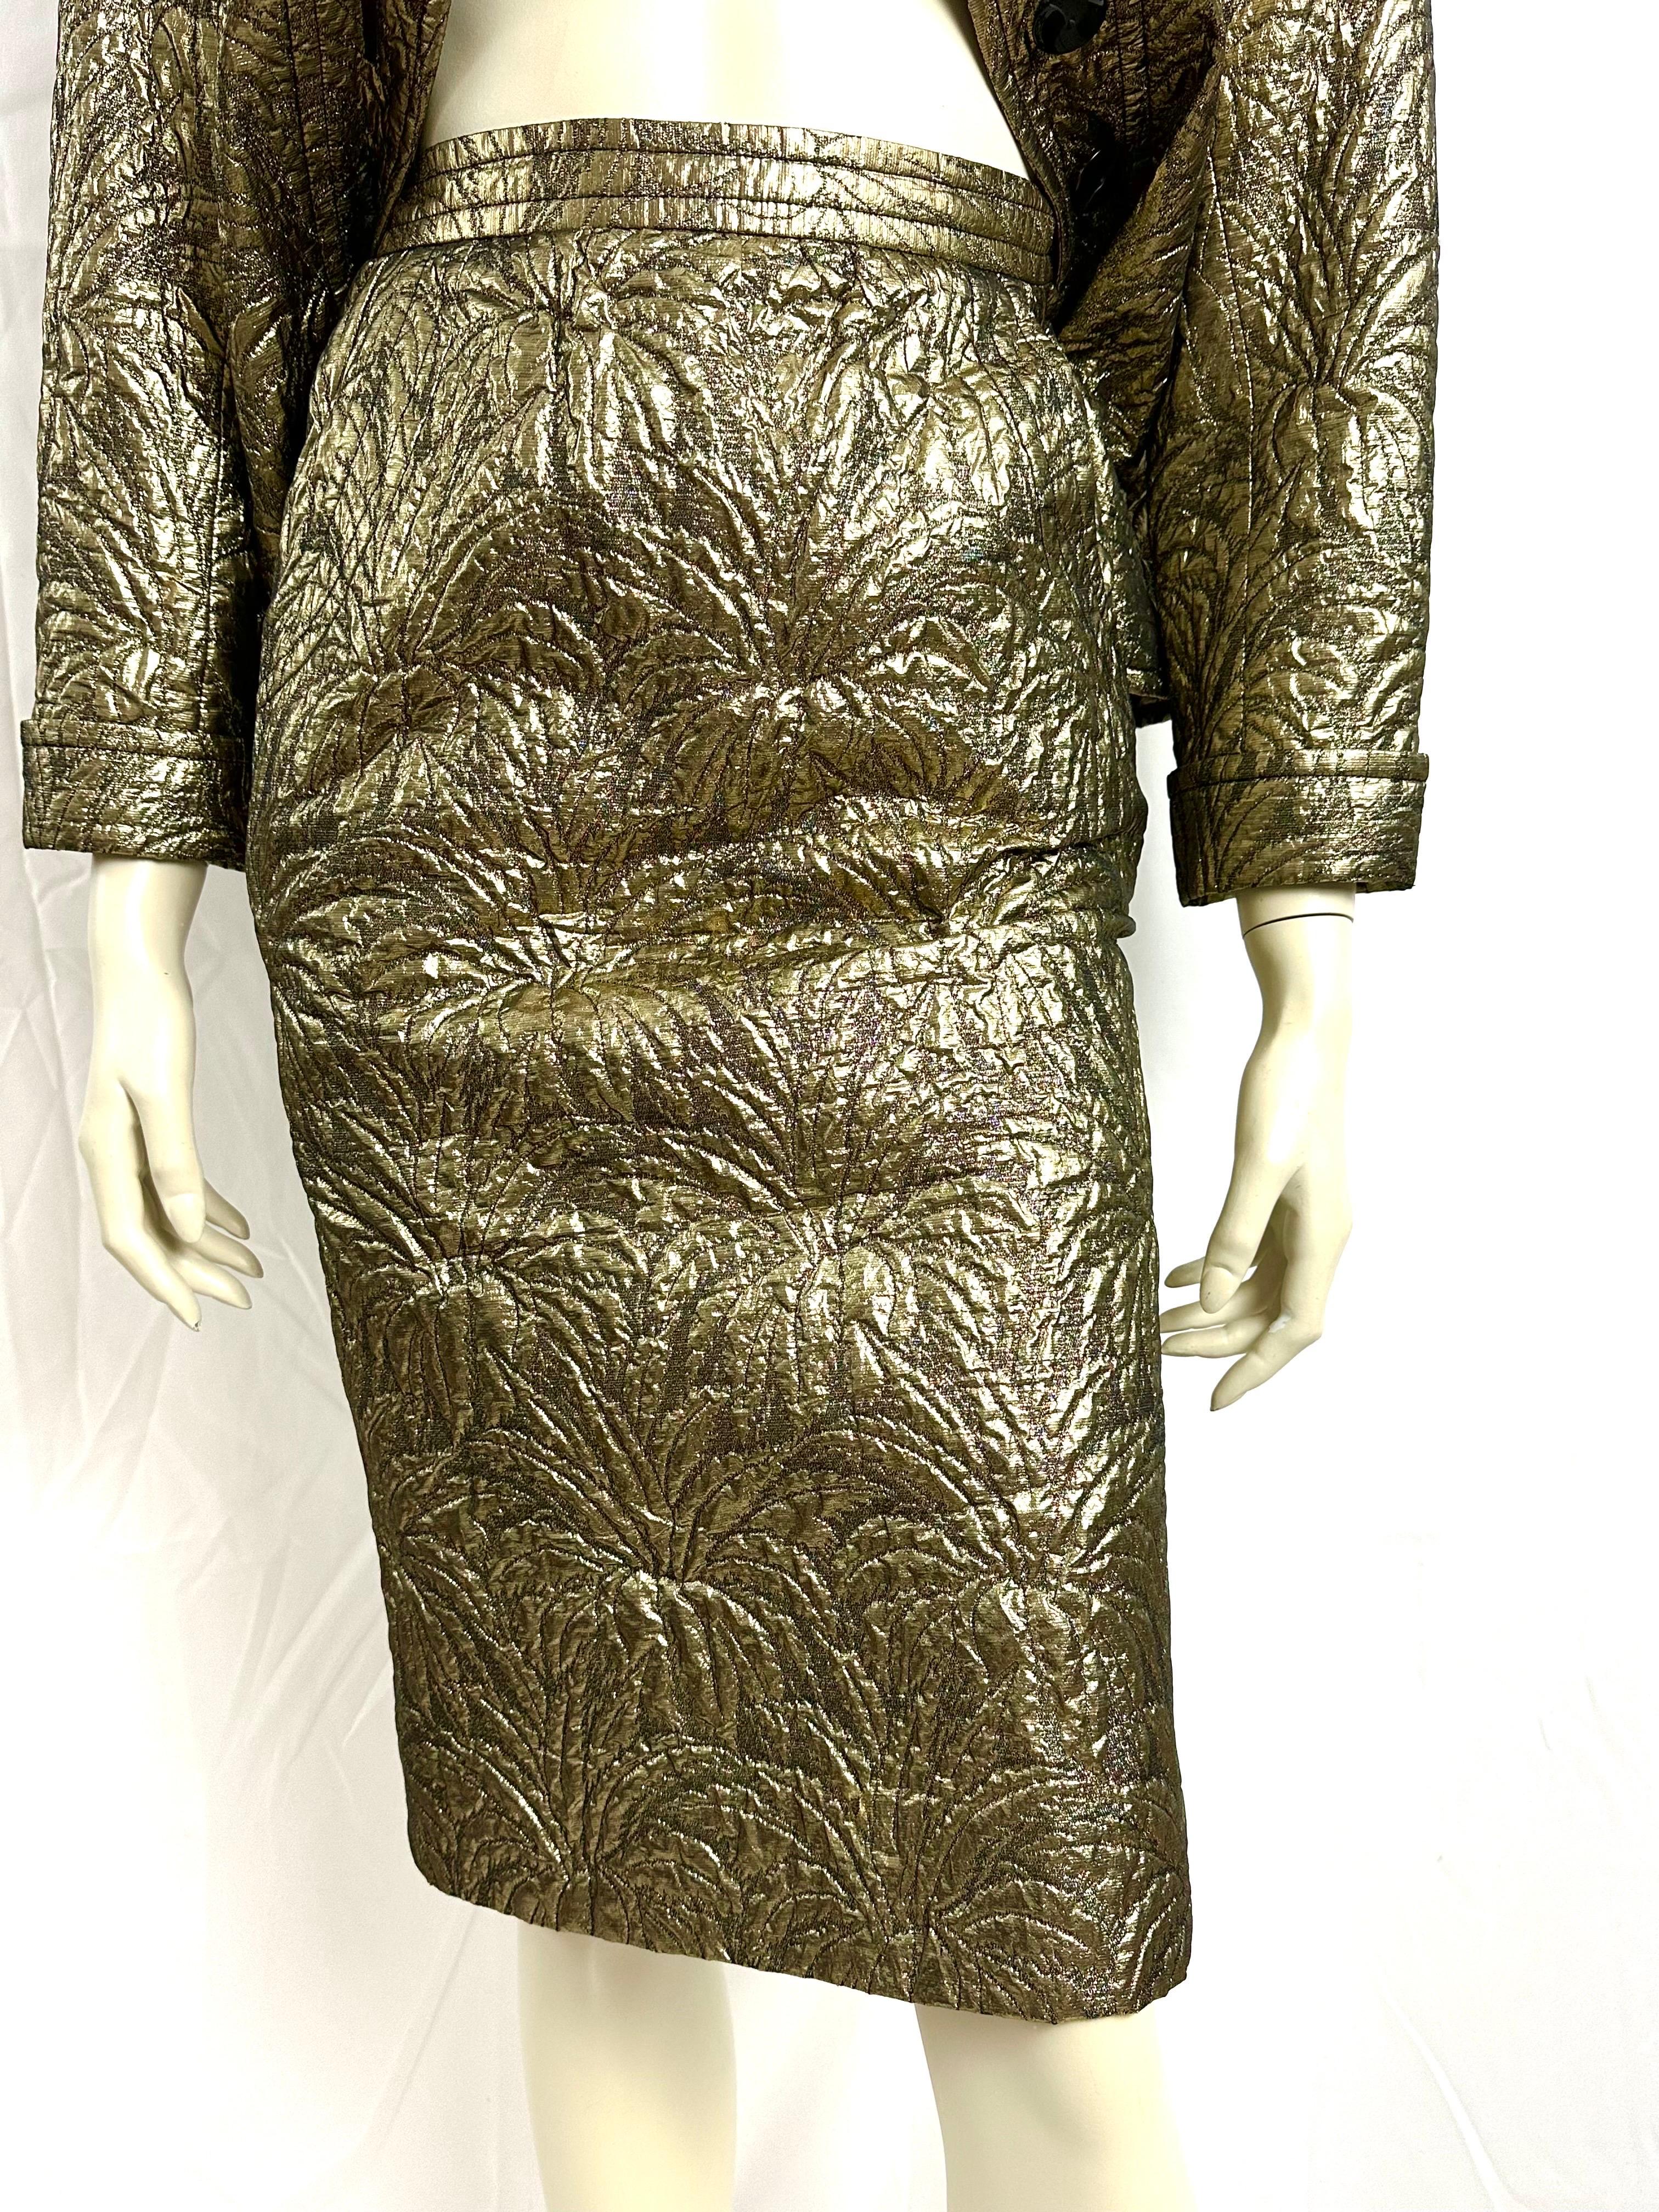 YSL Yves saint Laurent gold brocade skirt suit F/W 86 For Sale 3